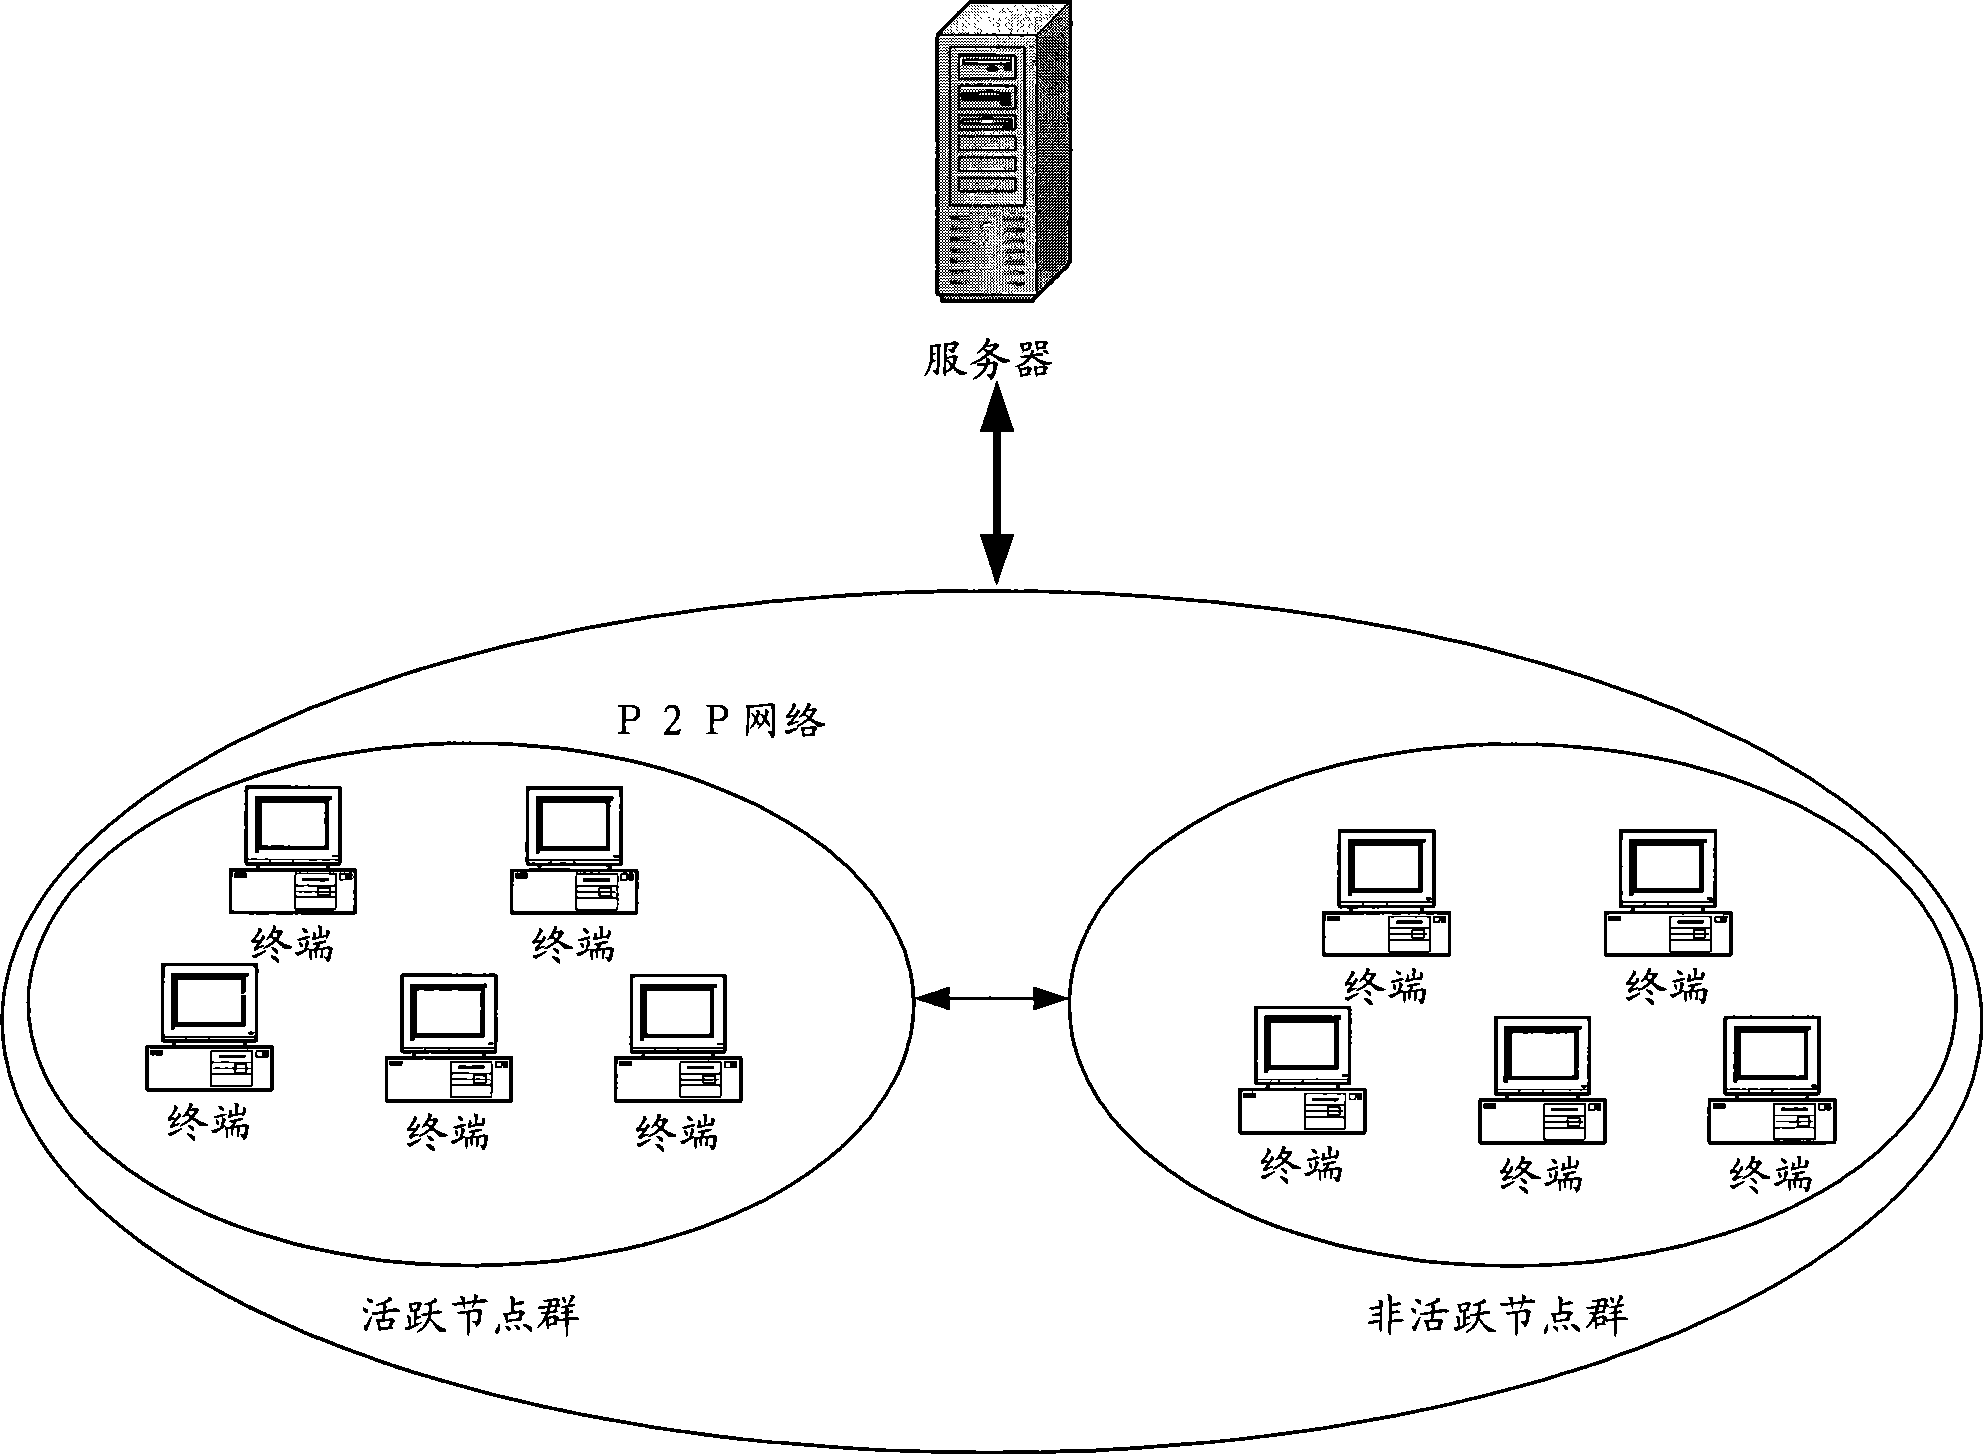 Method and system for transmitting and enciphering medium based on P2P network